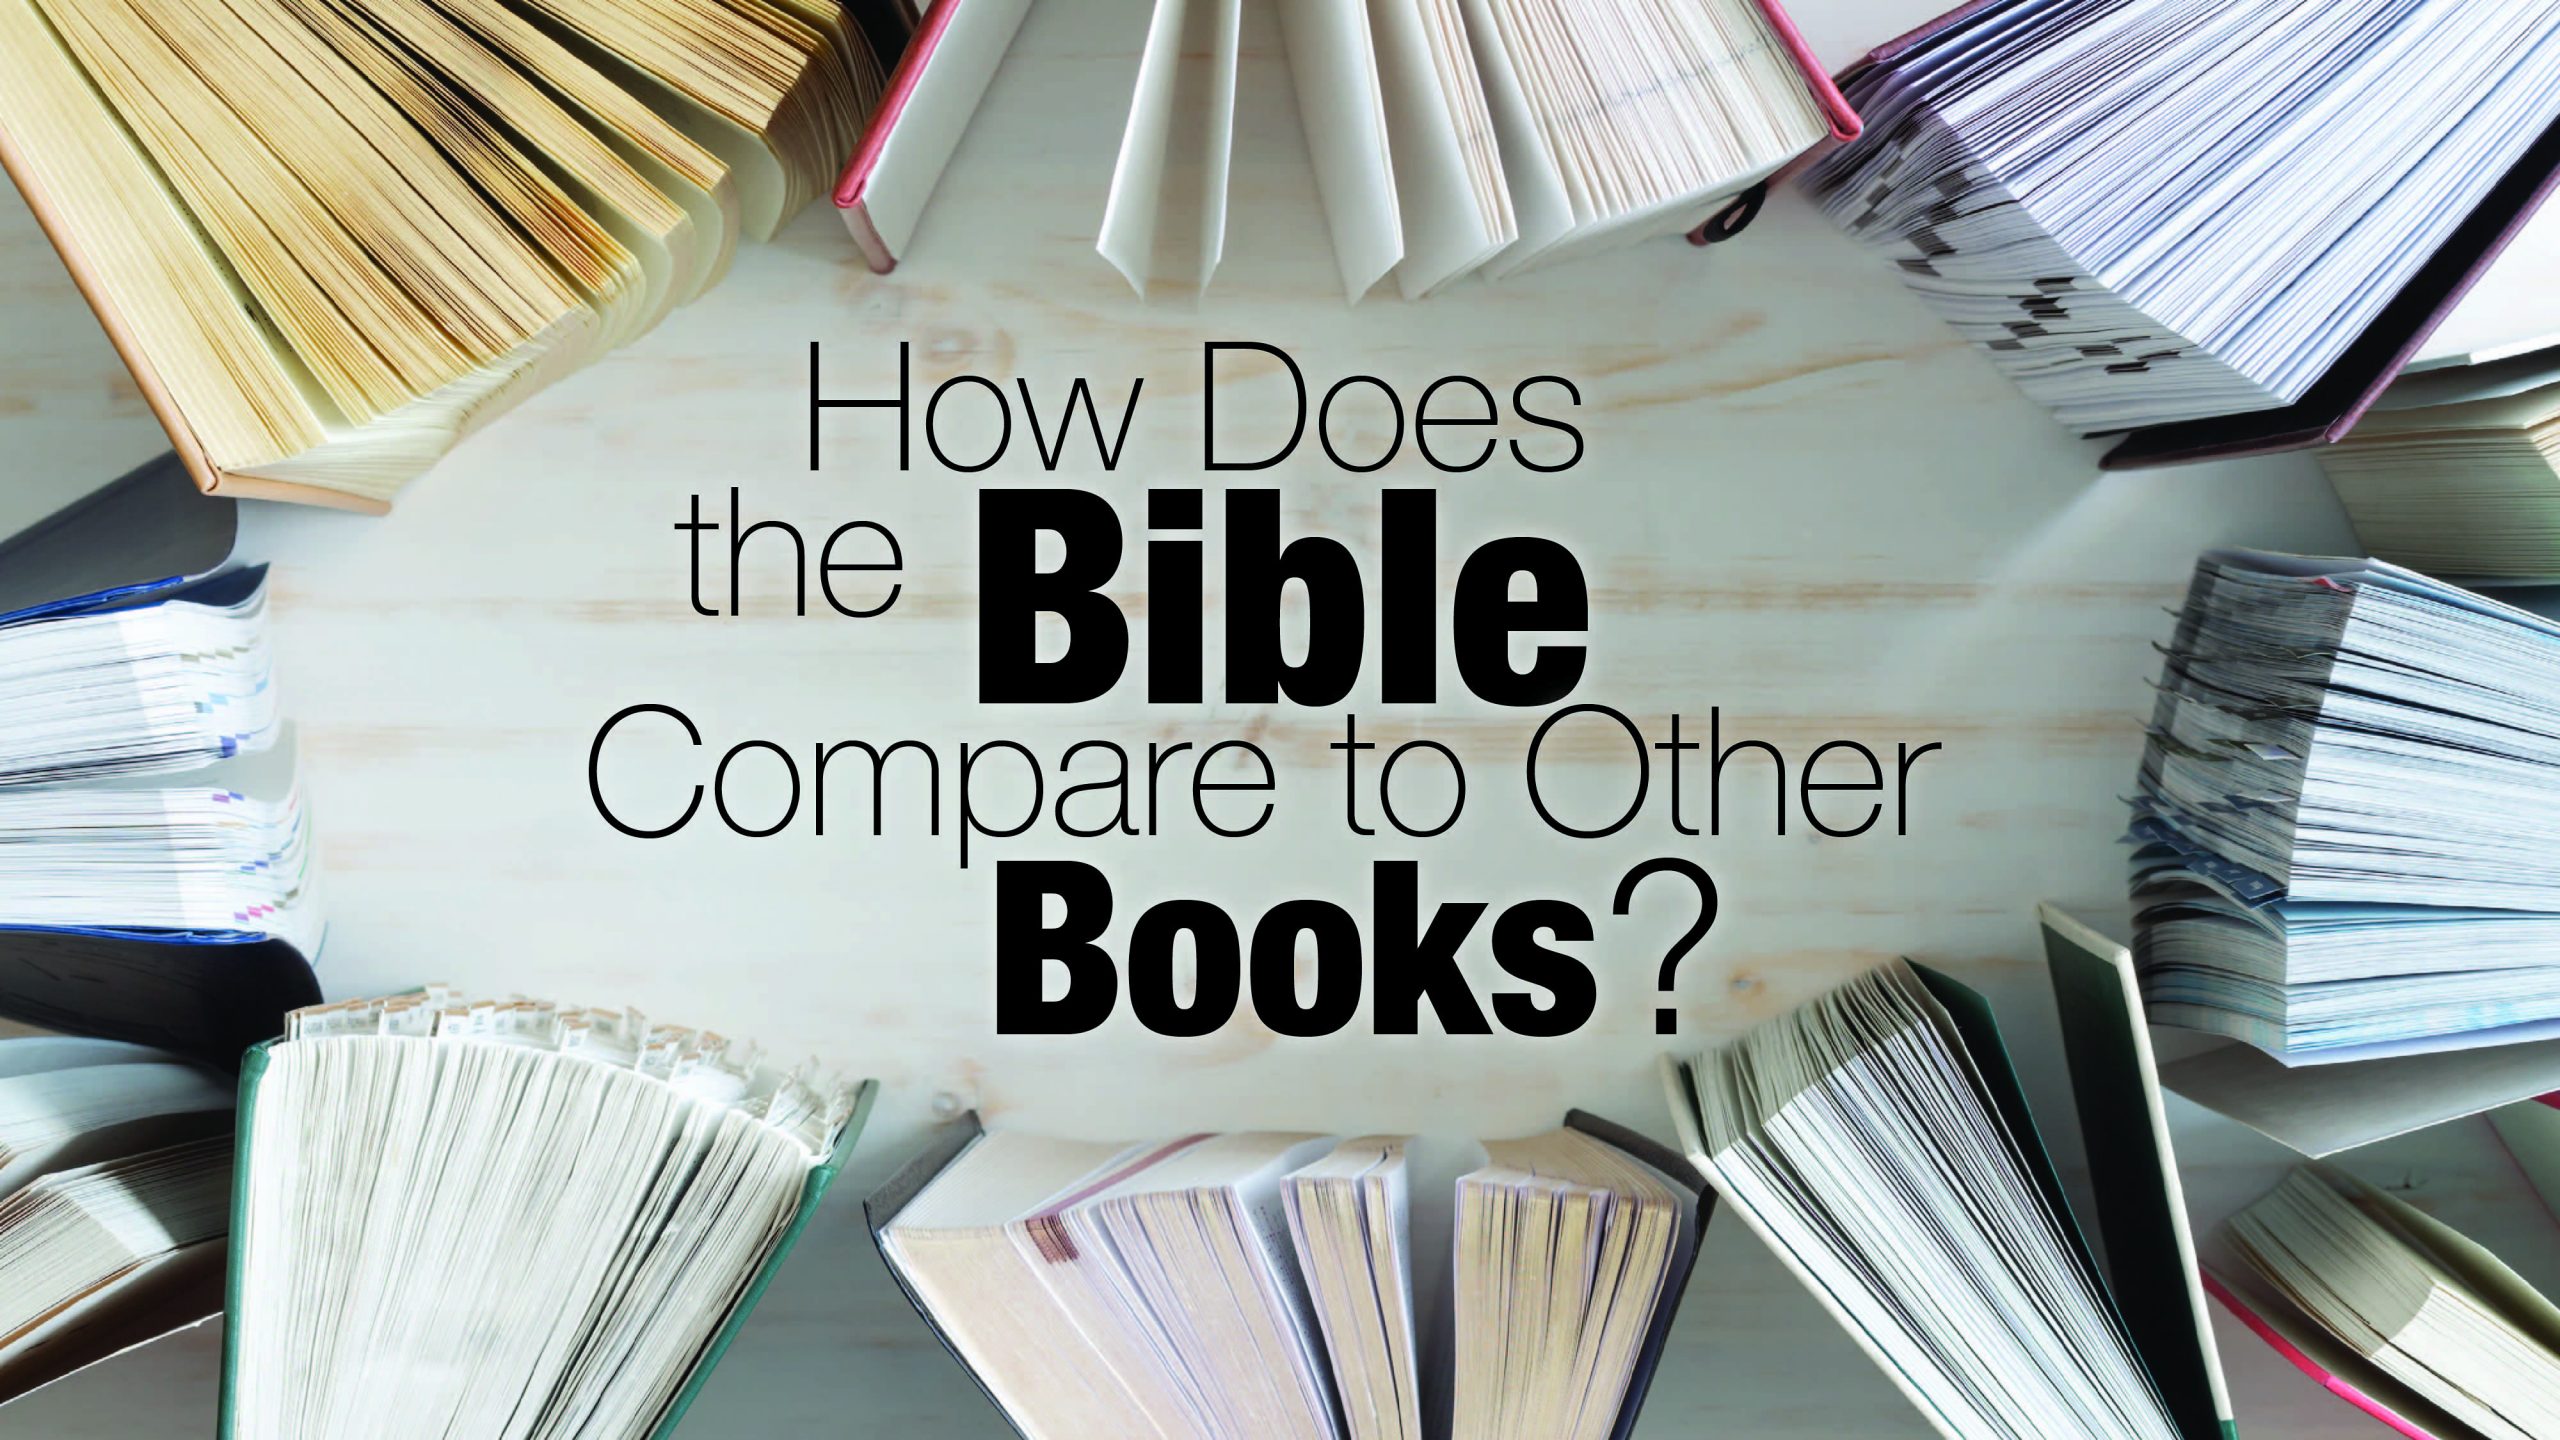 The Bible Compared to Other Books